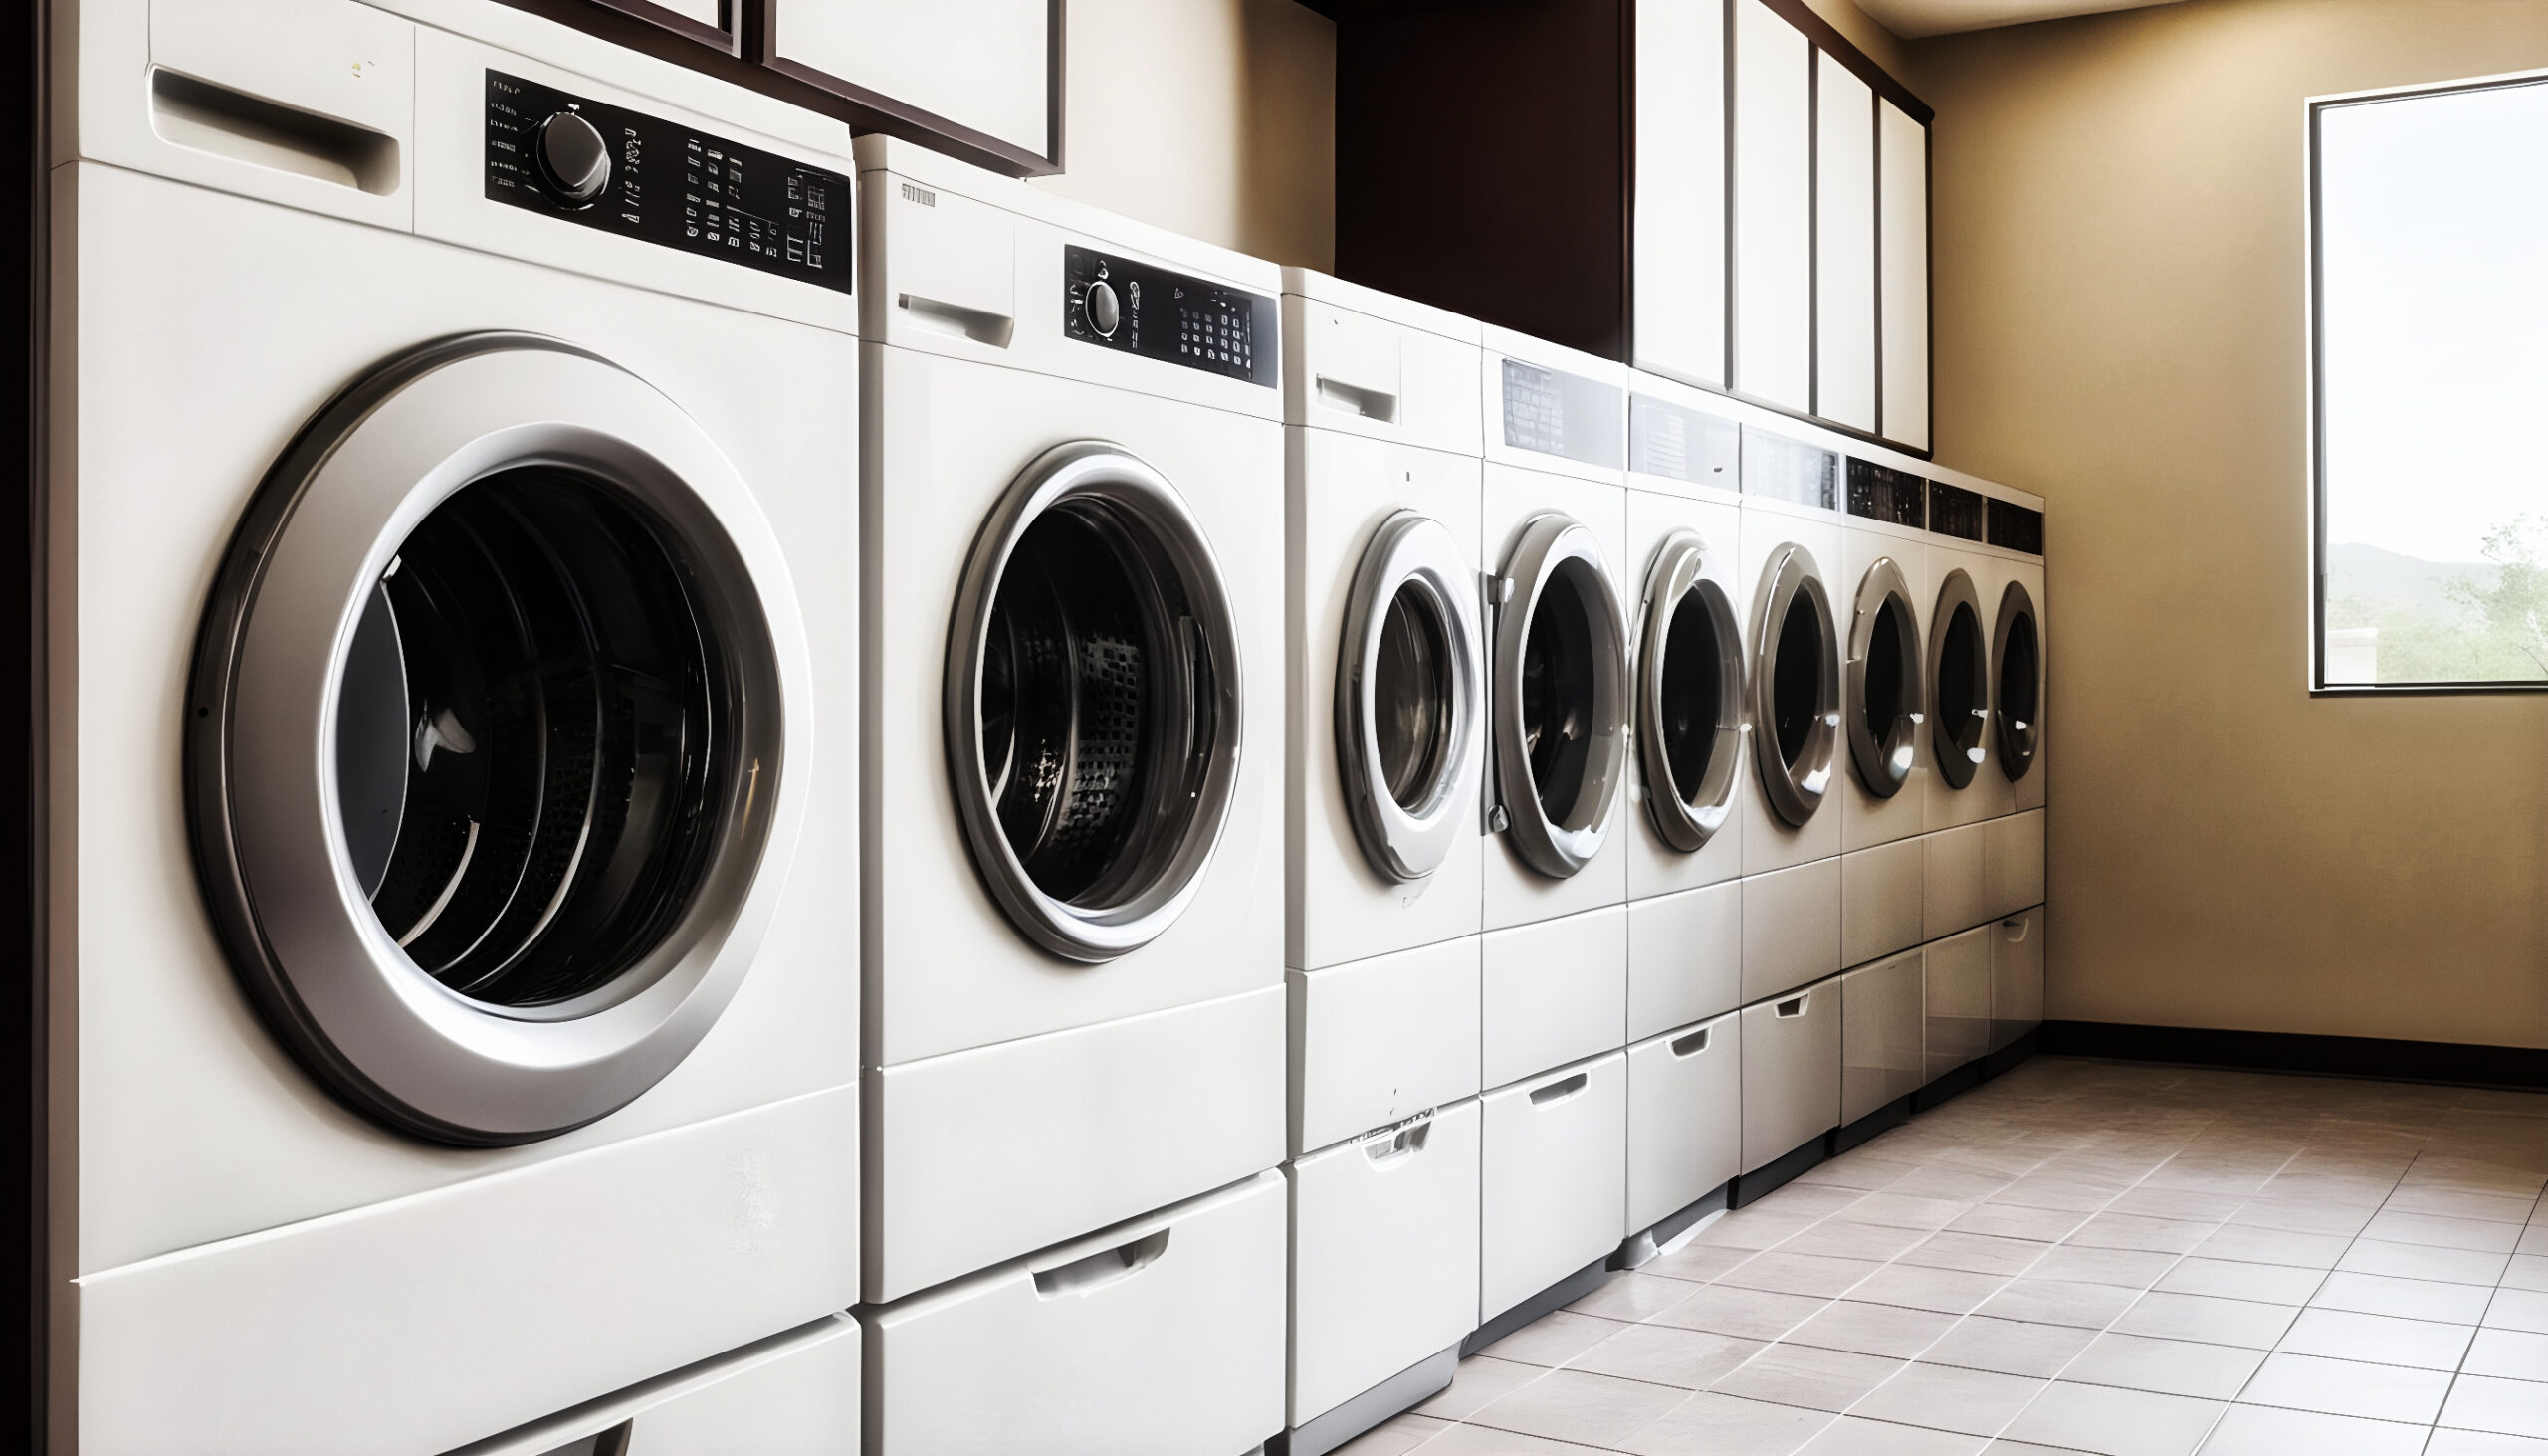 Coin-operated washer repair services for Dexter, Whirlpool, and Maytag brands in Lakeway, TX